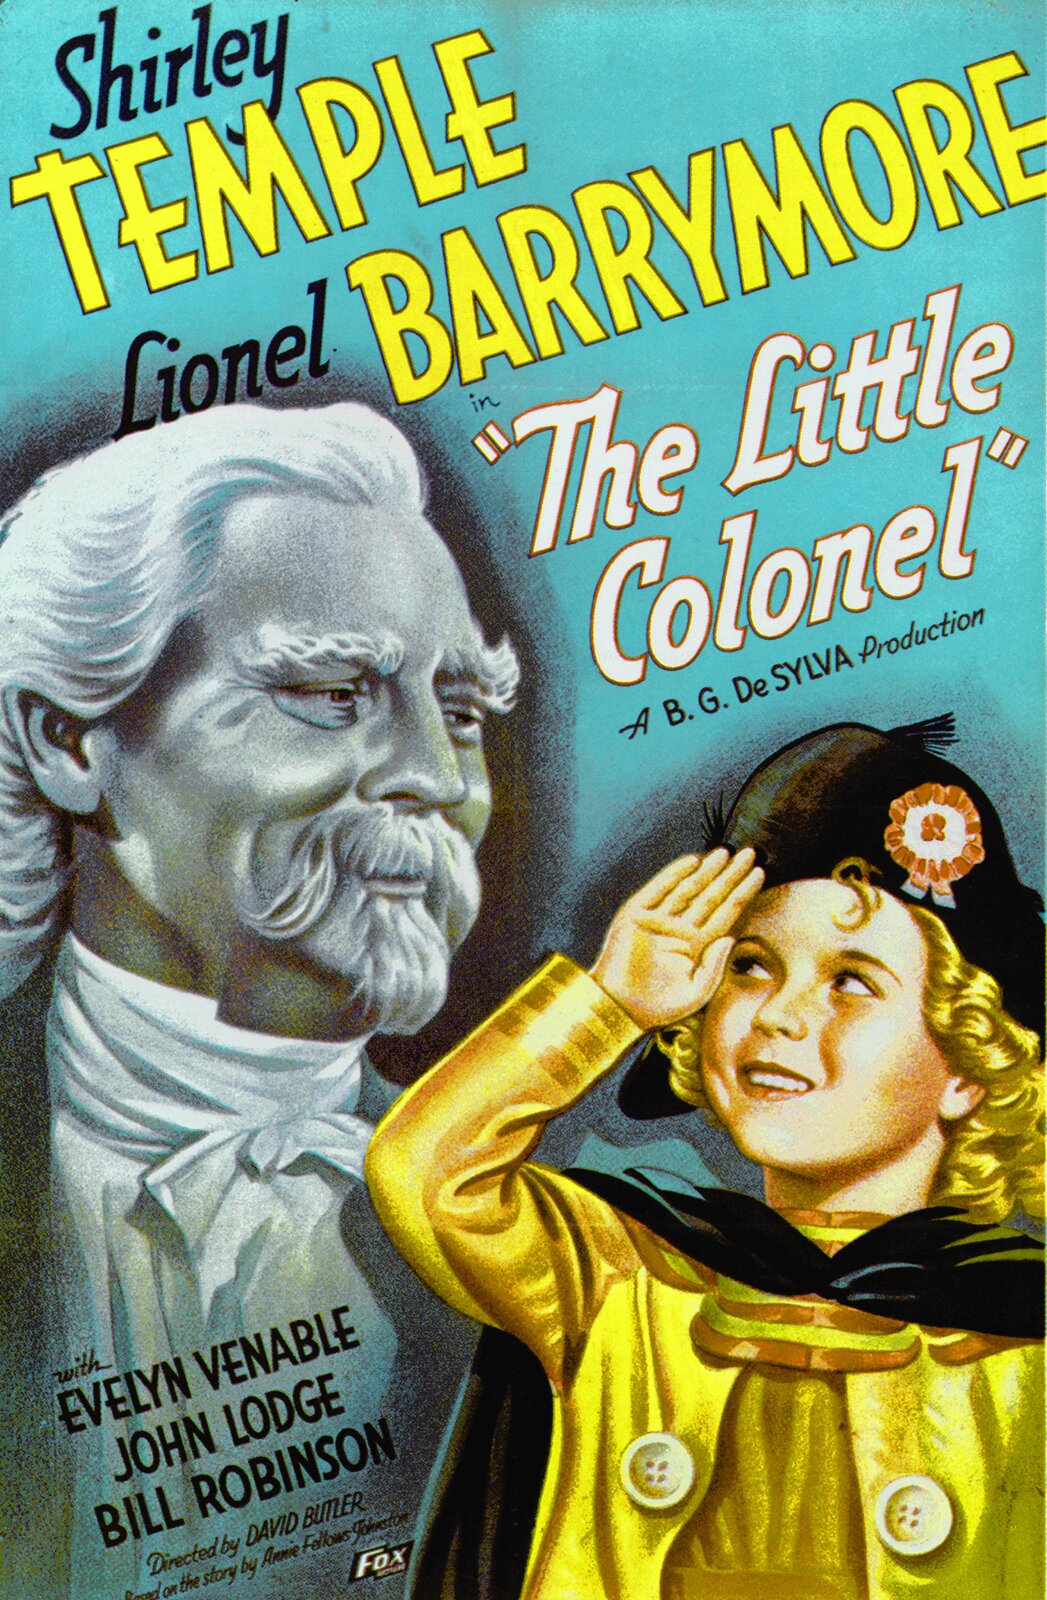 Poster-The-Little-Colonel-Shirley-Temple-Lionel.jpg